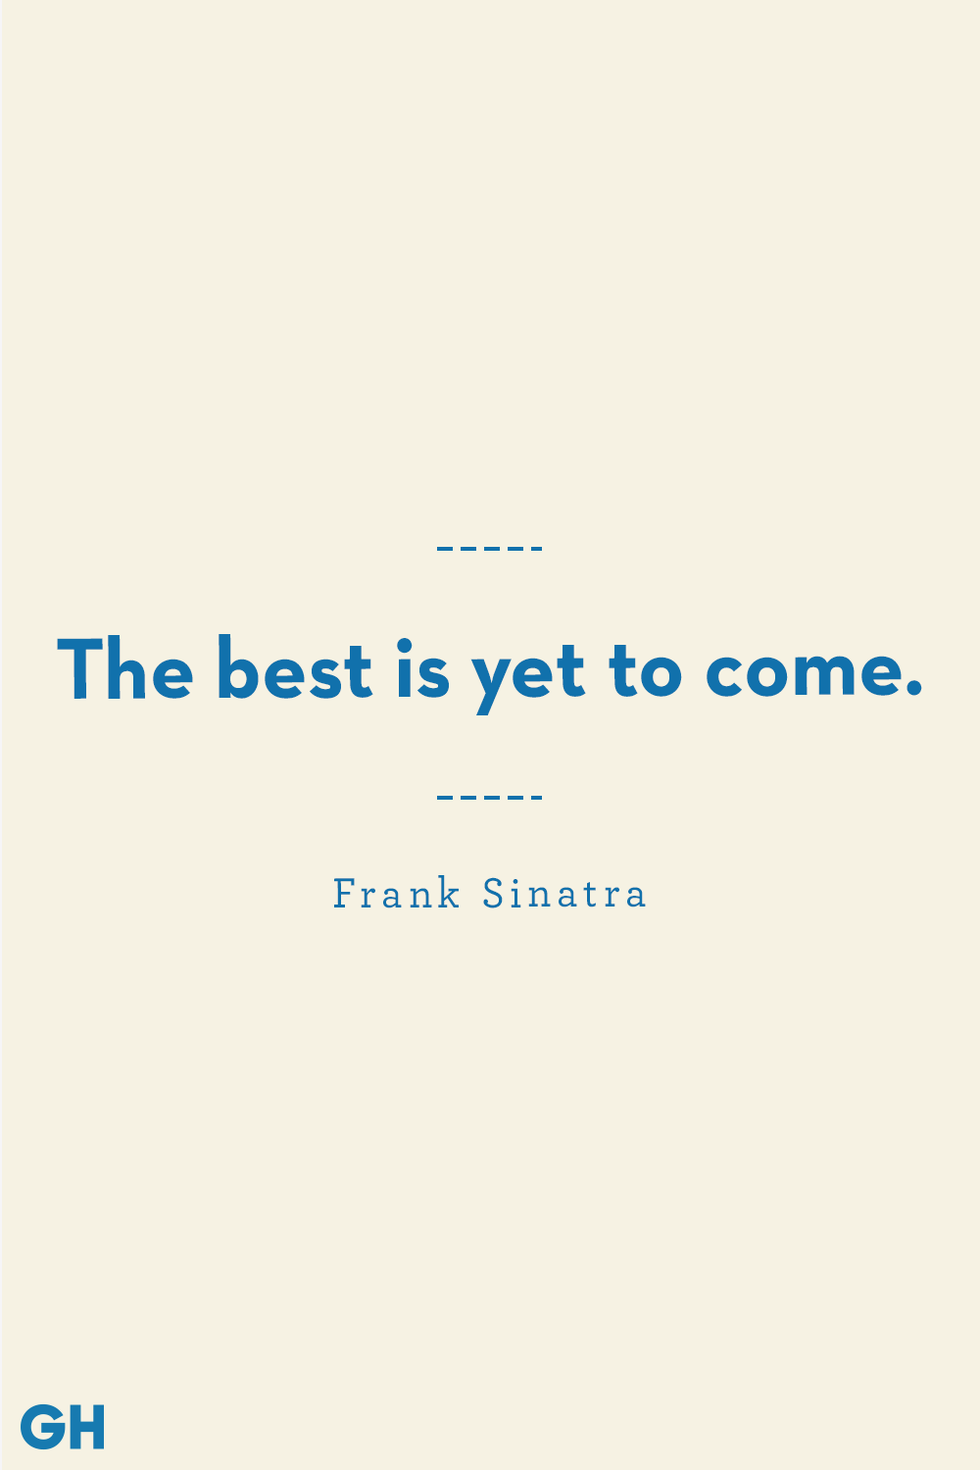 graduation captions — the best is yet to come frank sinatra